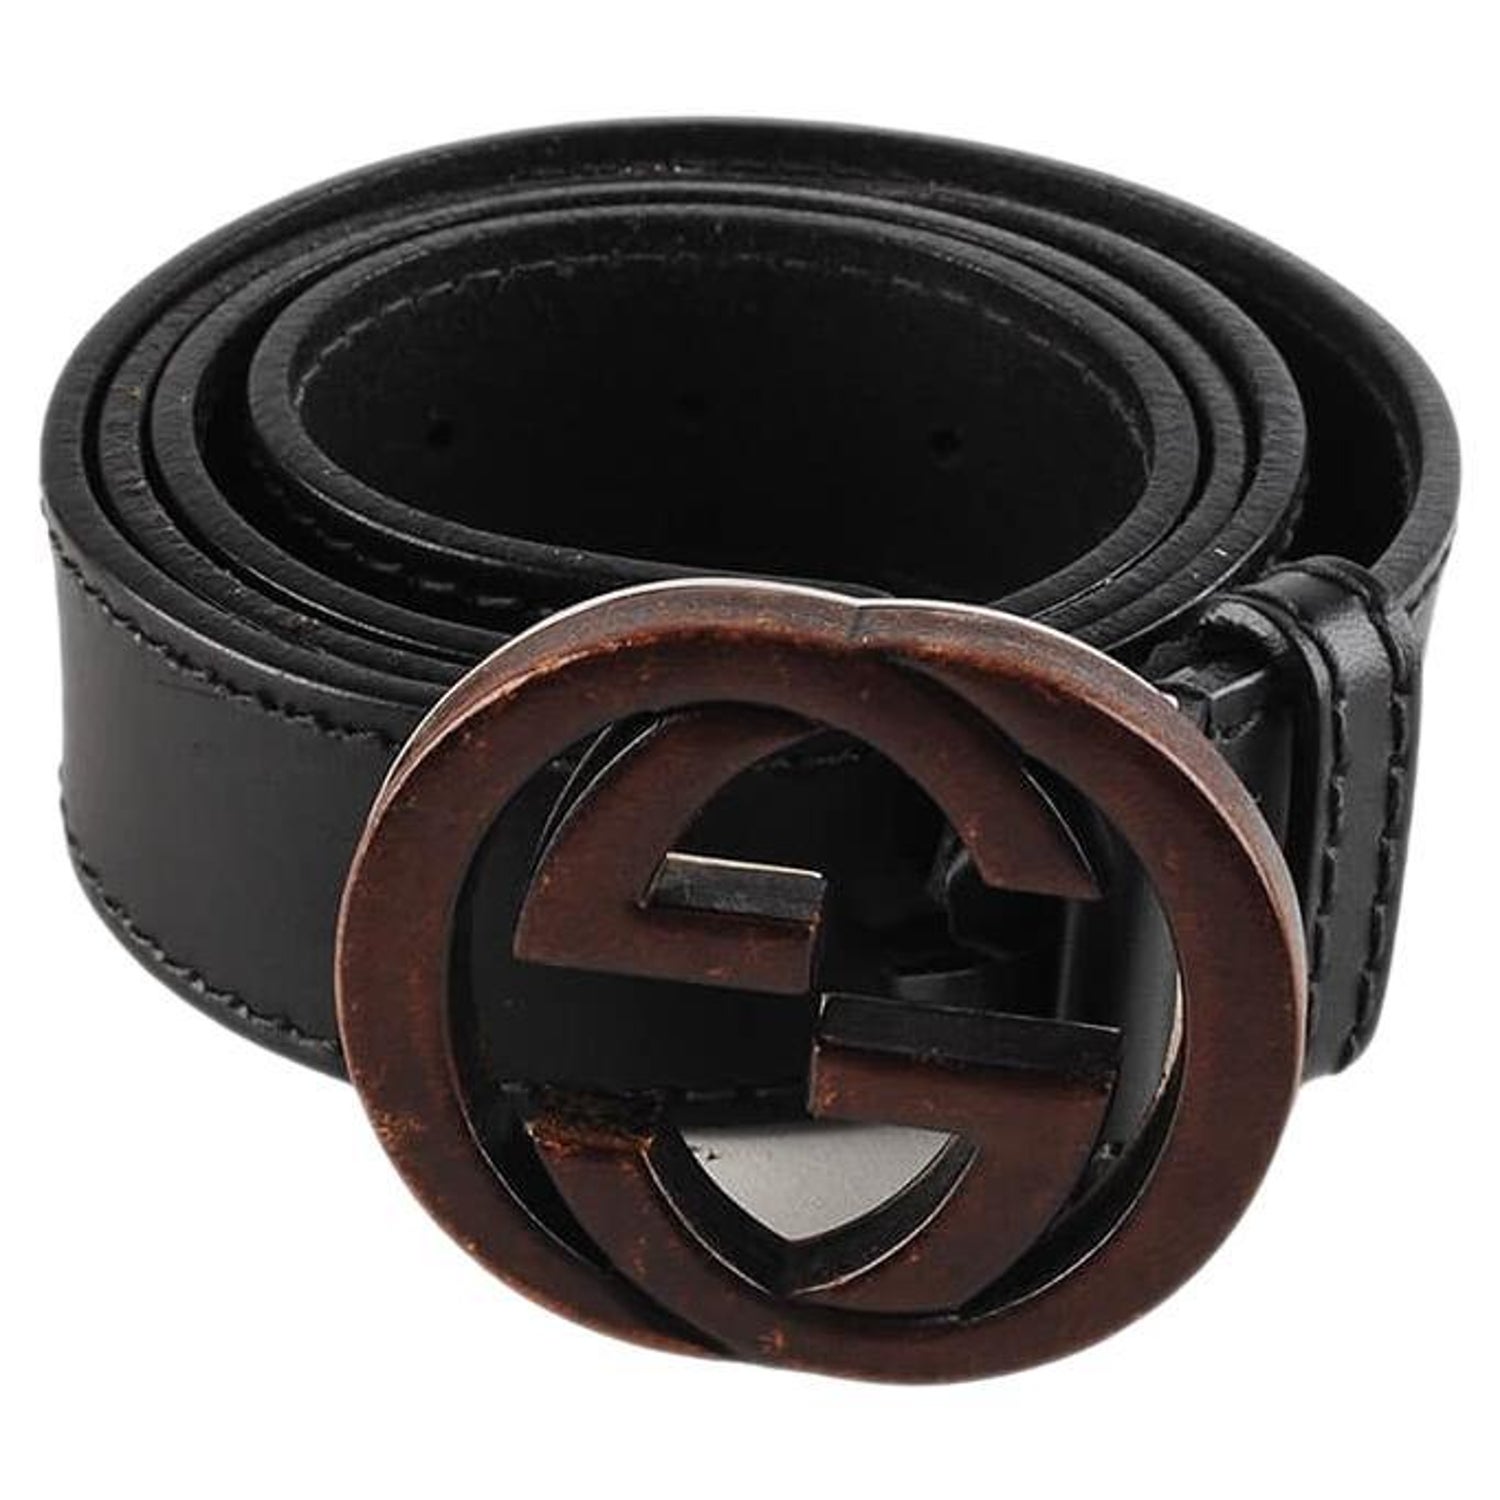 Sold at Auction: Gucci Brown Guccssima Monogram Belt - Size 90